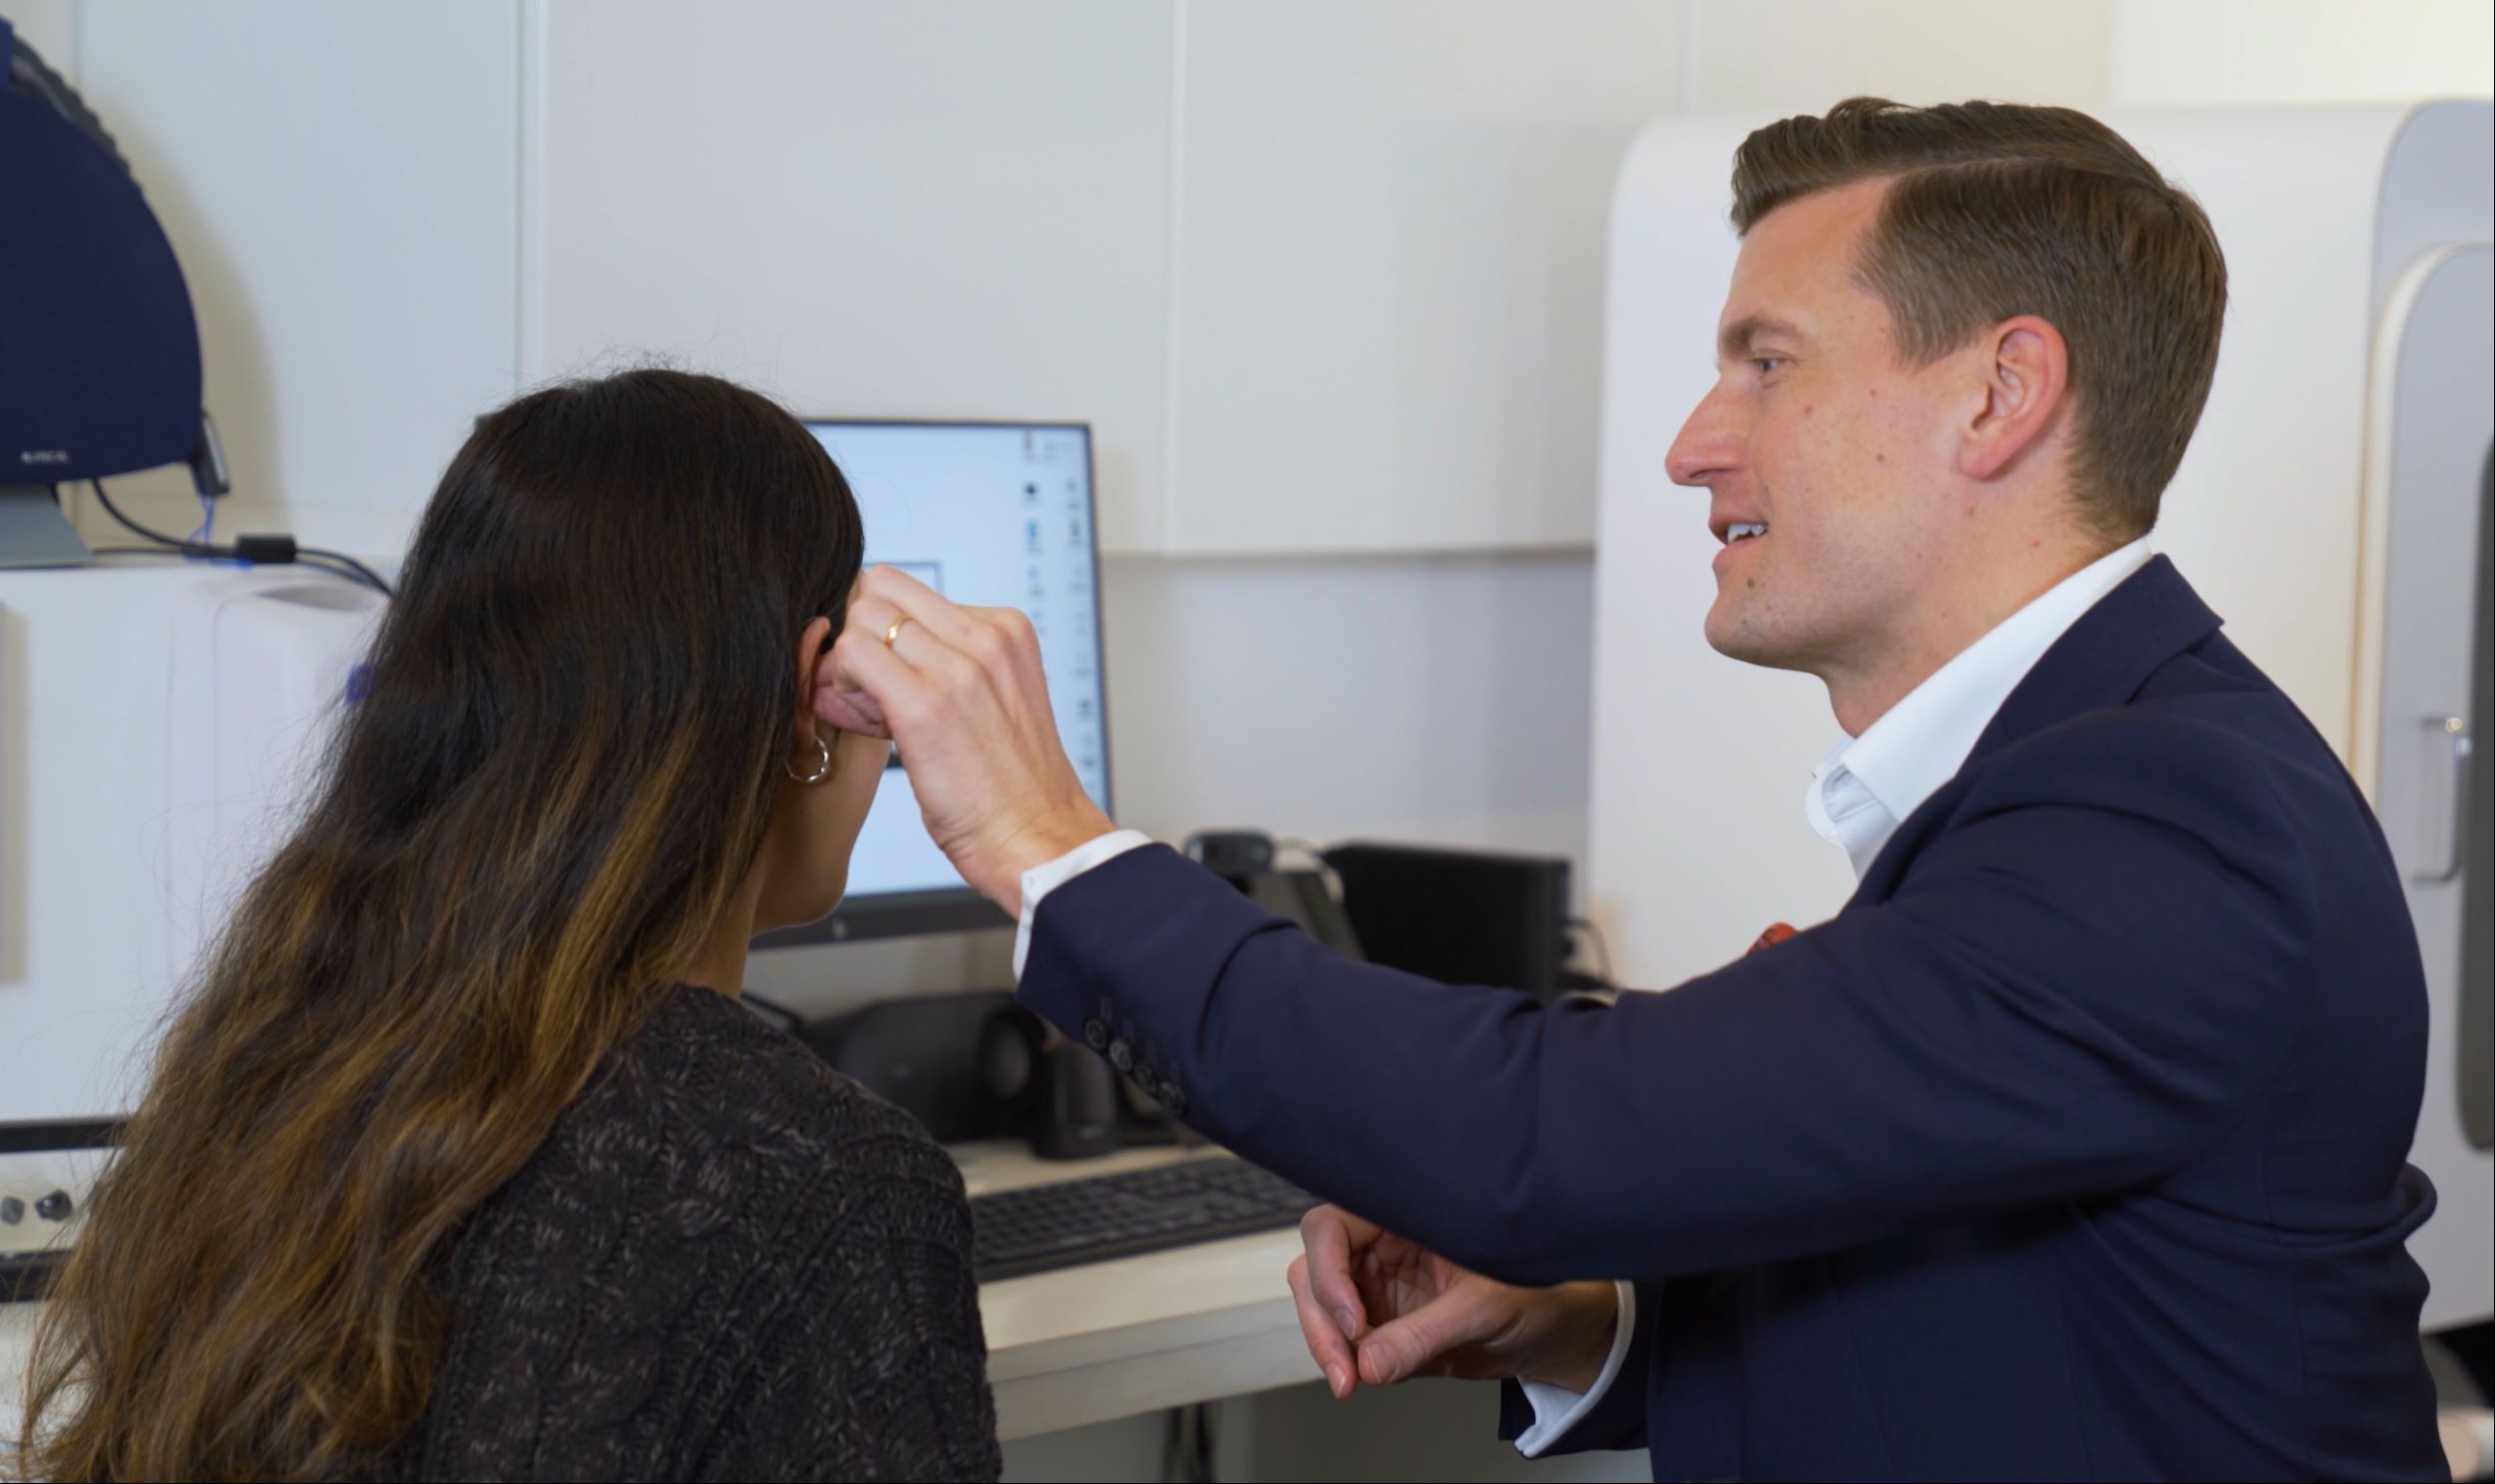 Hearing aid fitting on a patient